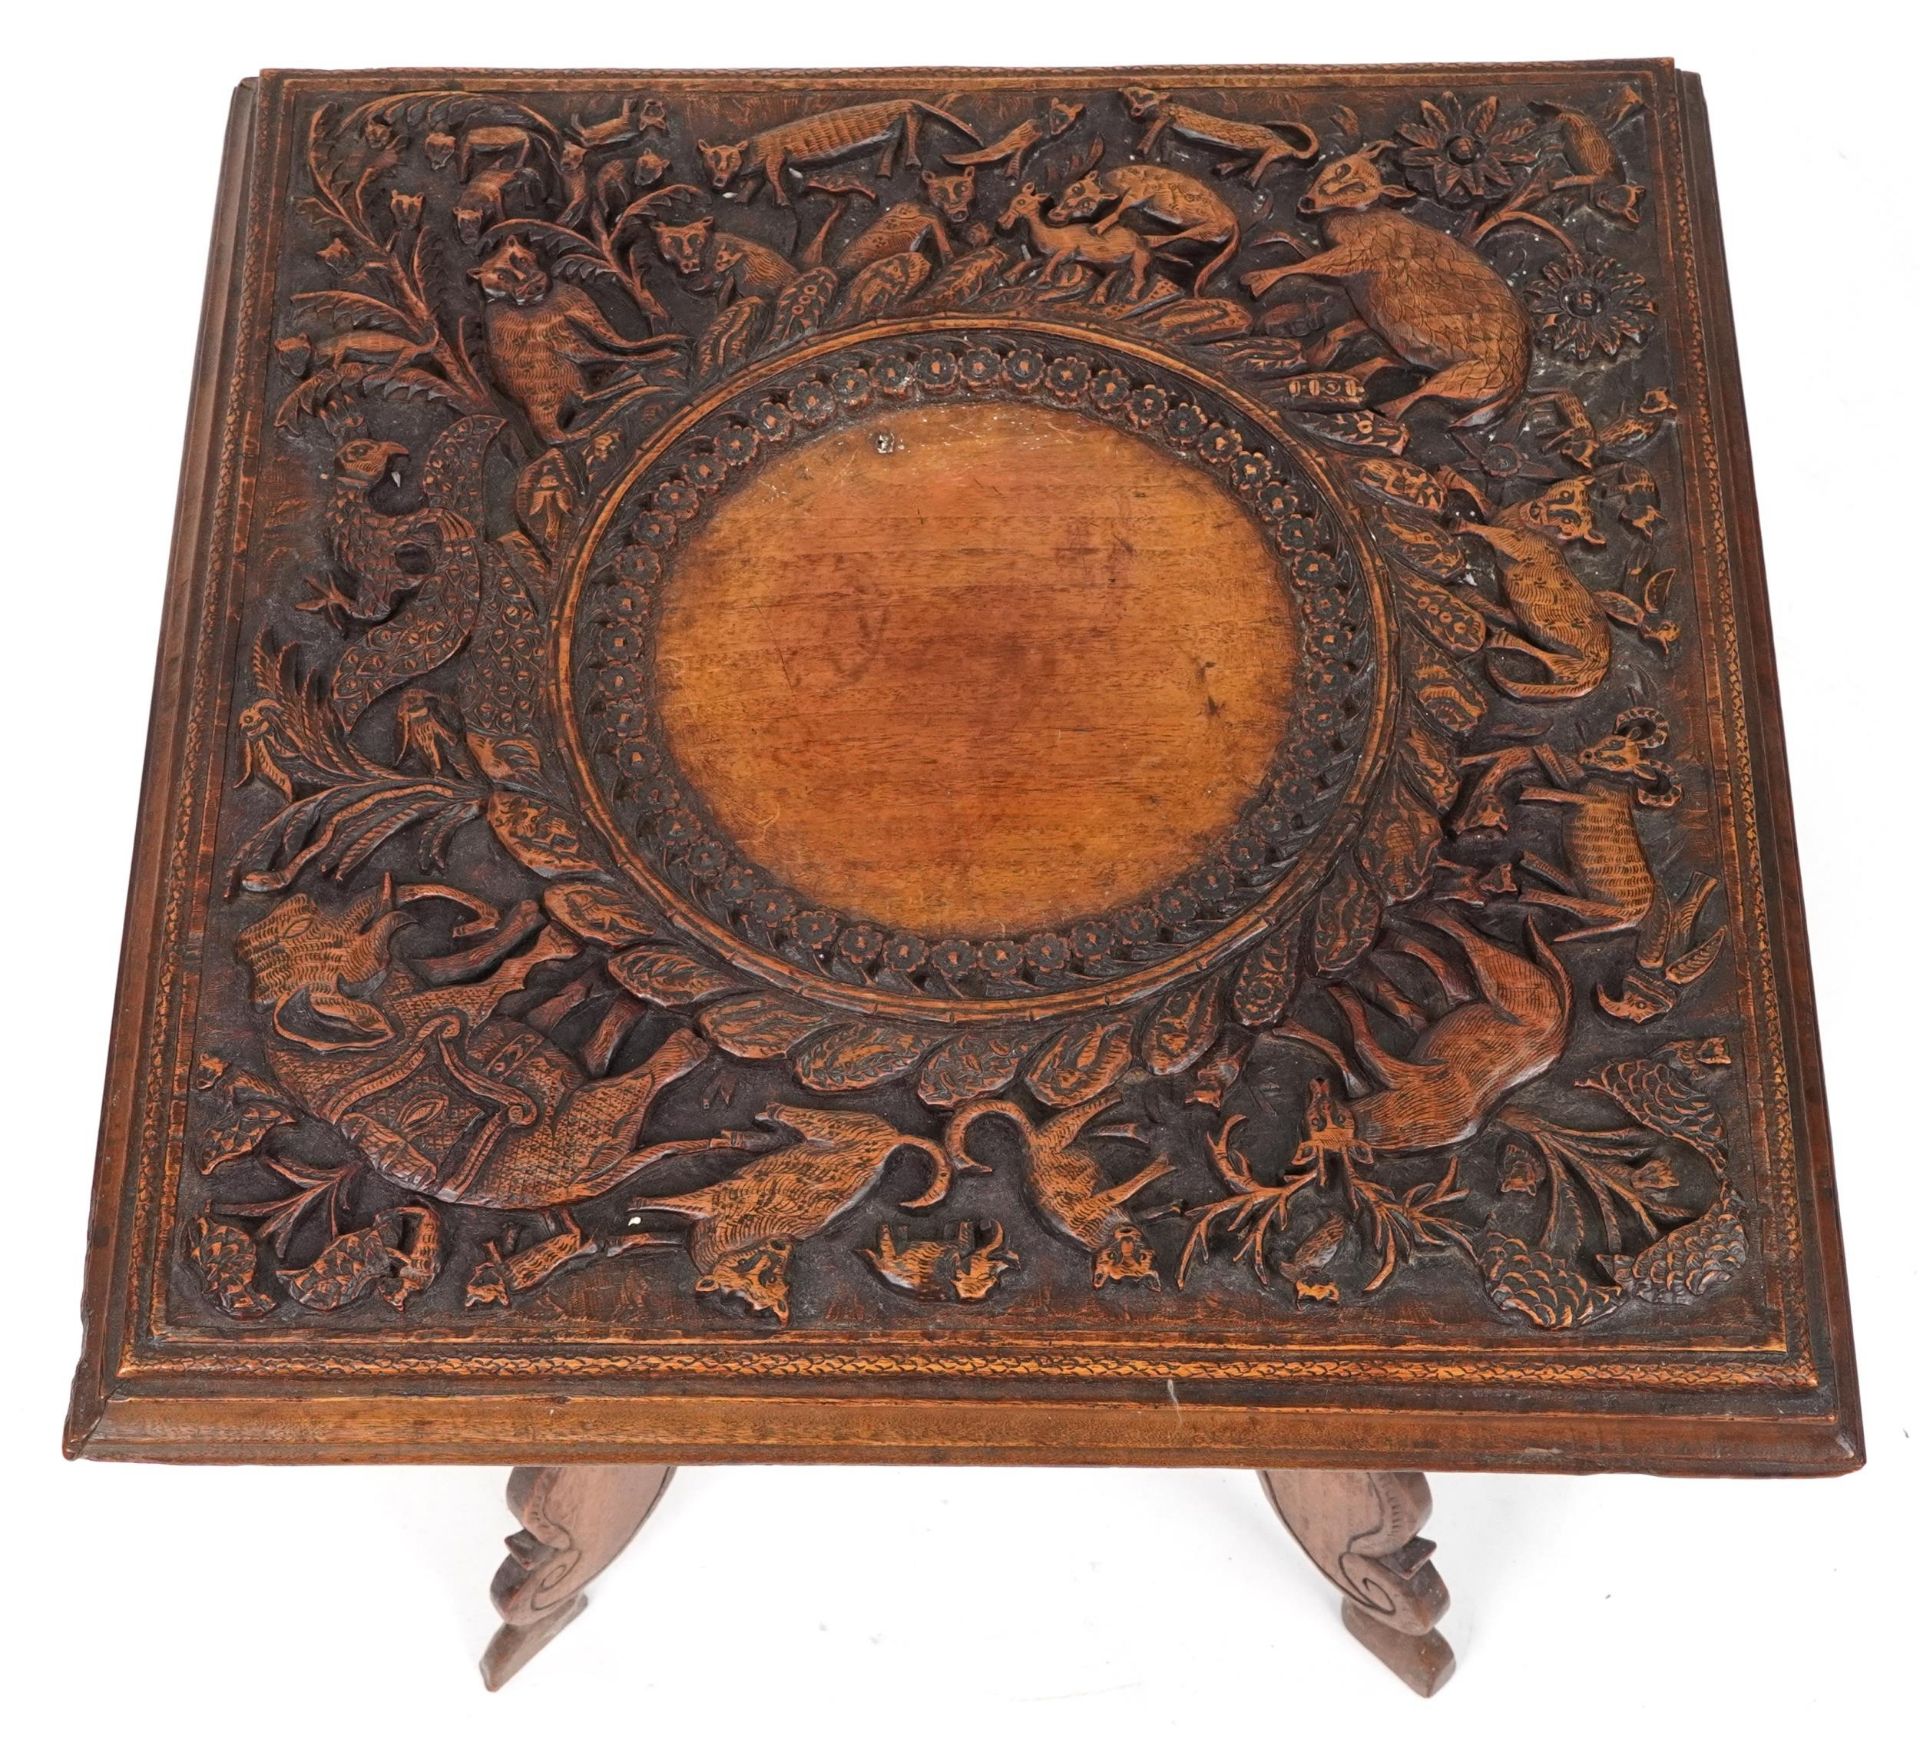 Anglo Indian hardwood folding side table, finely and deeply carved with an elephant and wild animals - Image 3 of 4